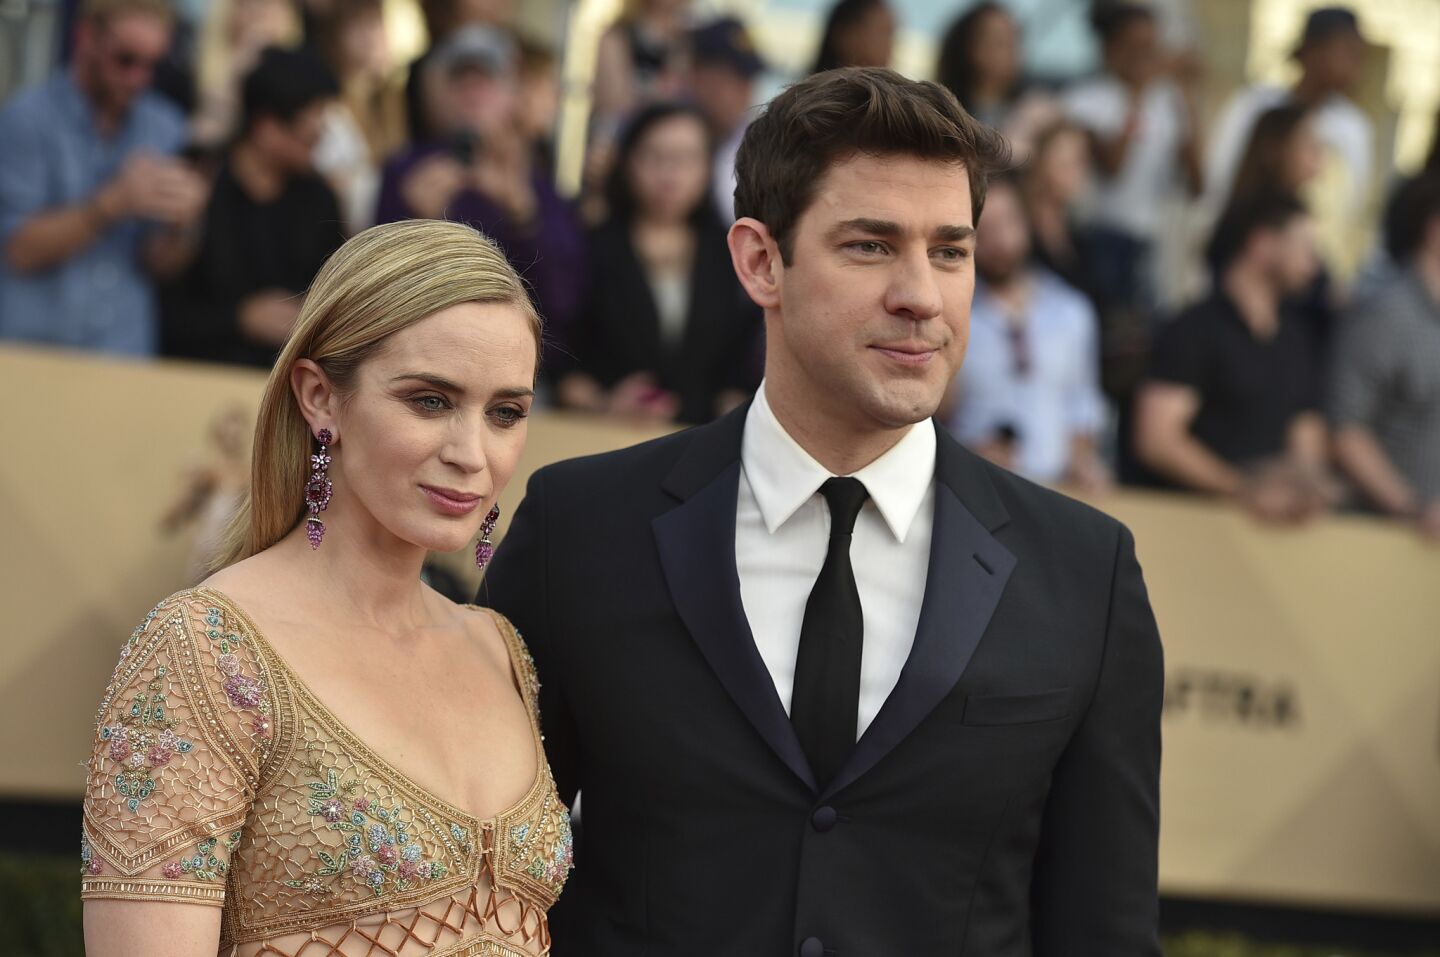 Emily Blunt, left, with husband John Krasinski, is a nominee for "The Girl on the Train."